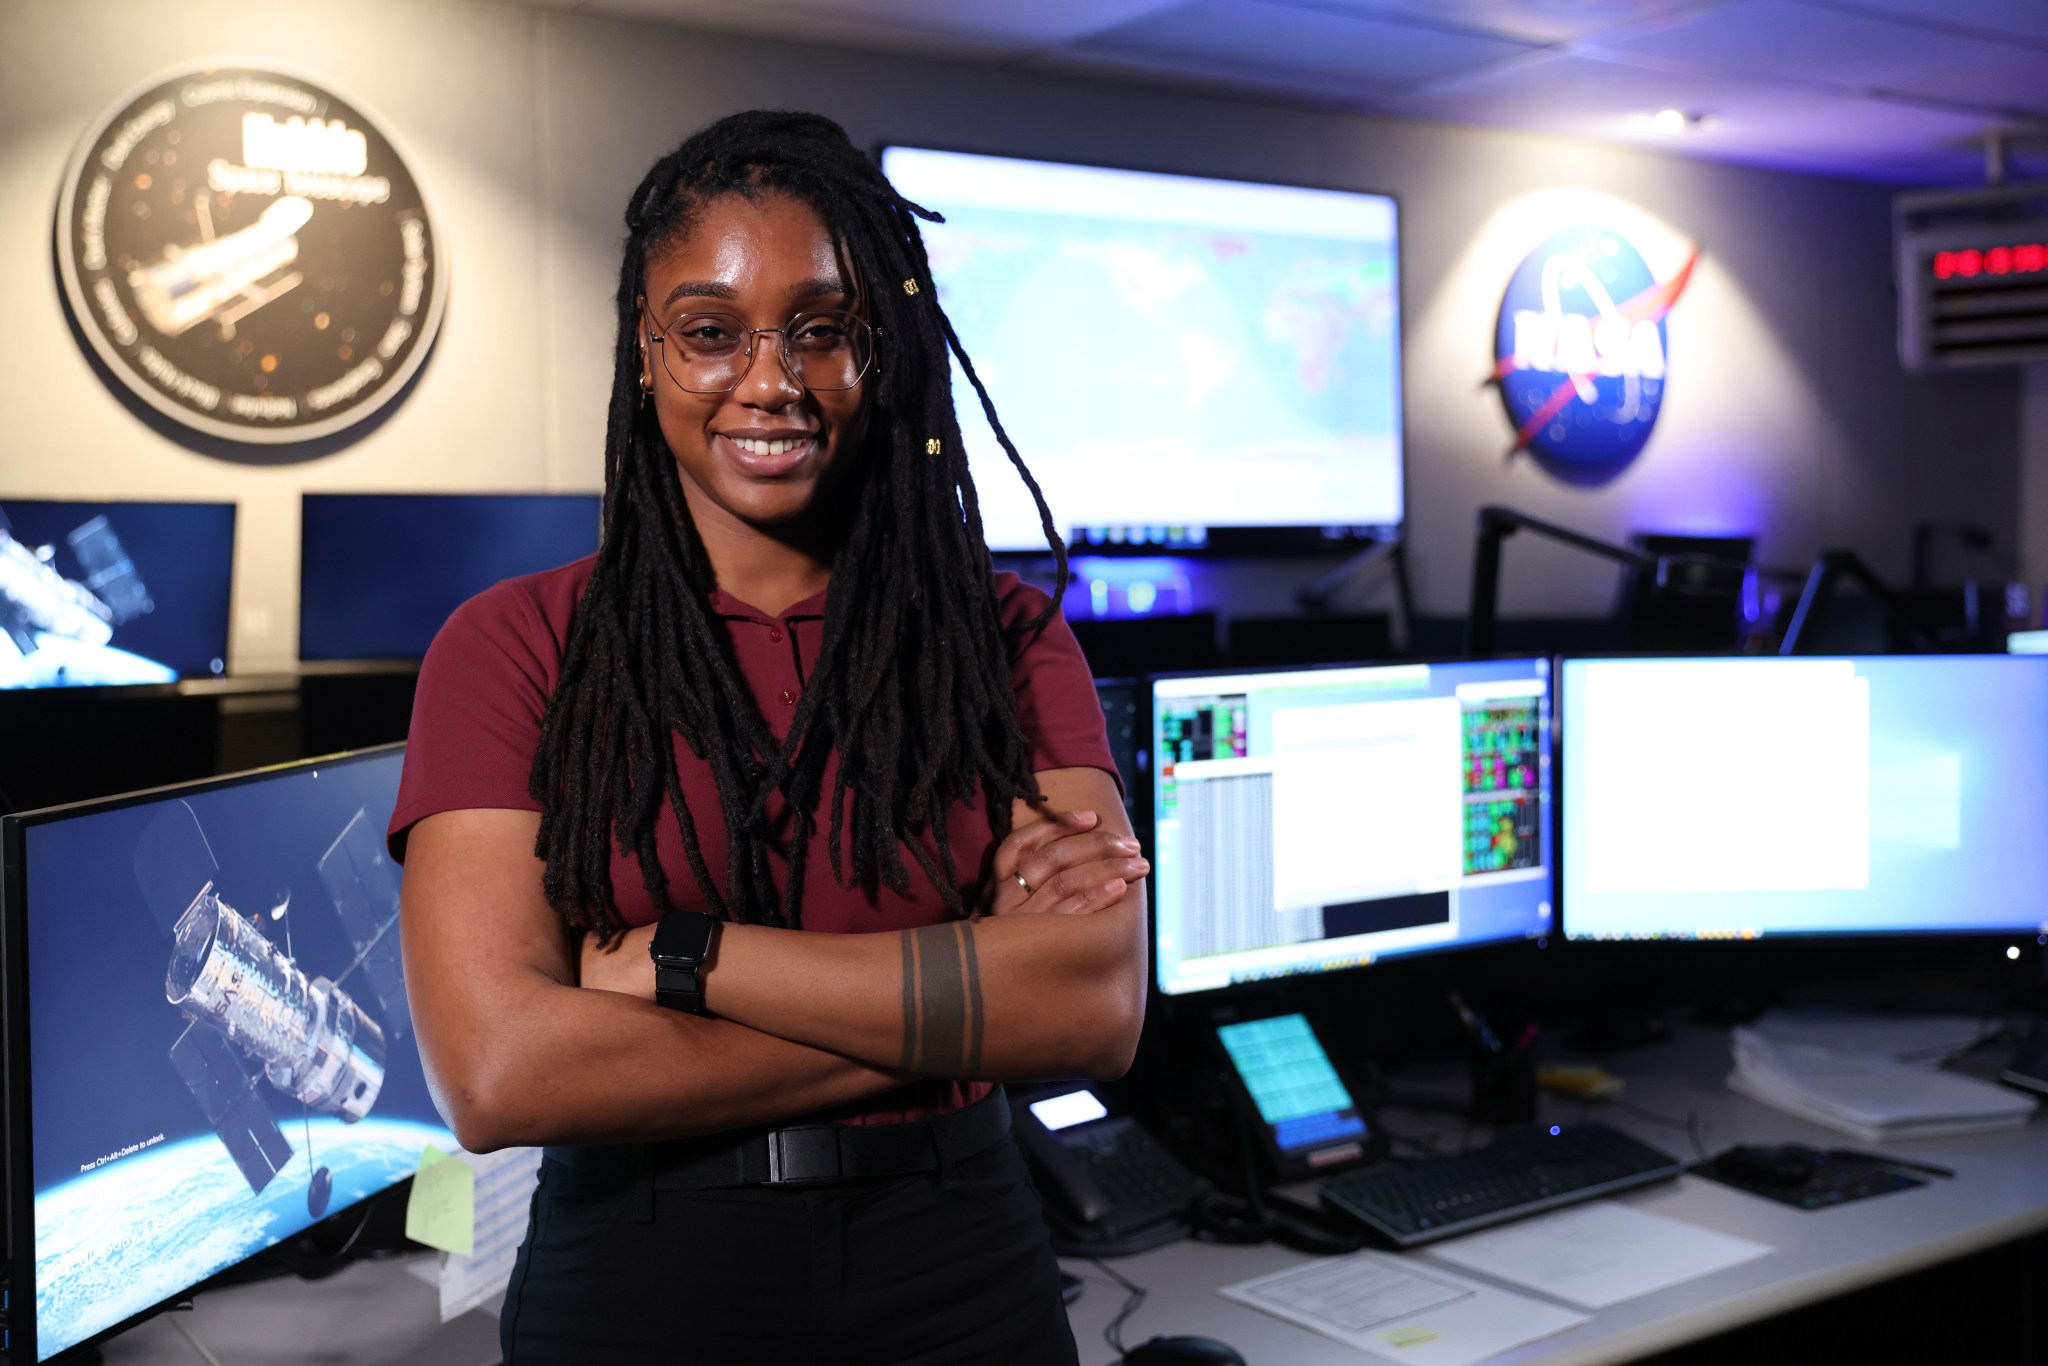 Phanthom Donald, a Black woman with long black dreadlocks and glasses, smiles and poses in the Hubble Space Telescope control room. She wears a burgundy polo and black pants and has a black tattooed band around her left forearm.